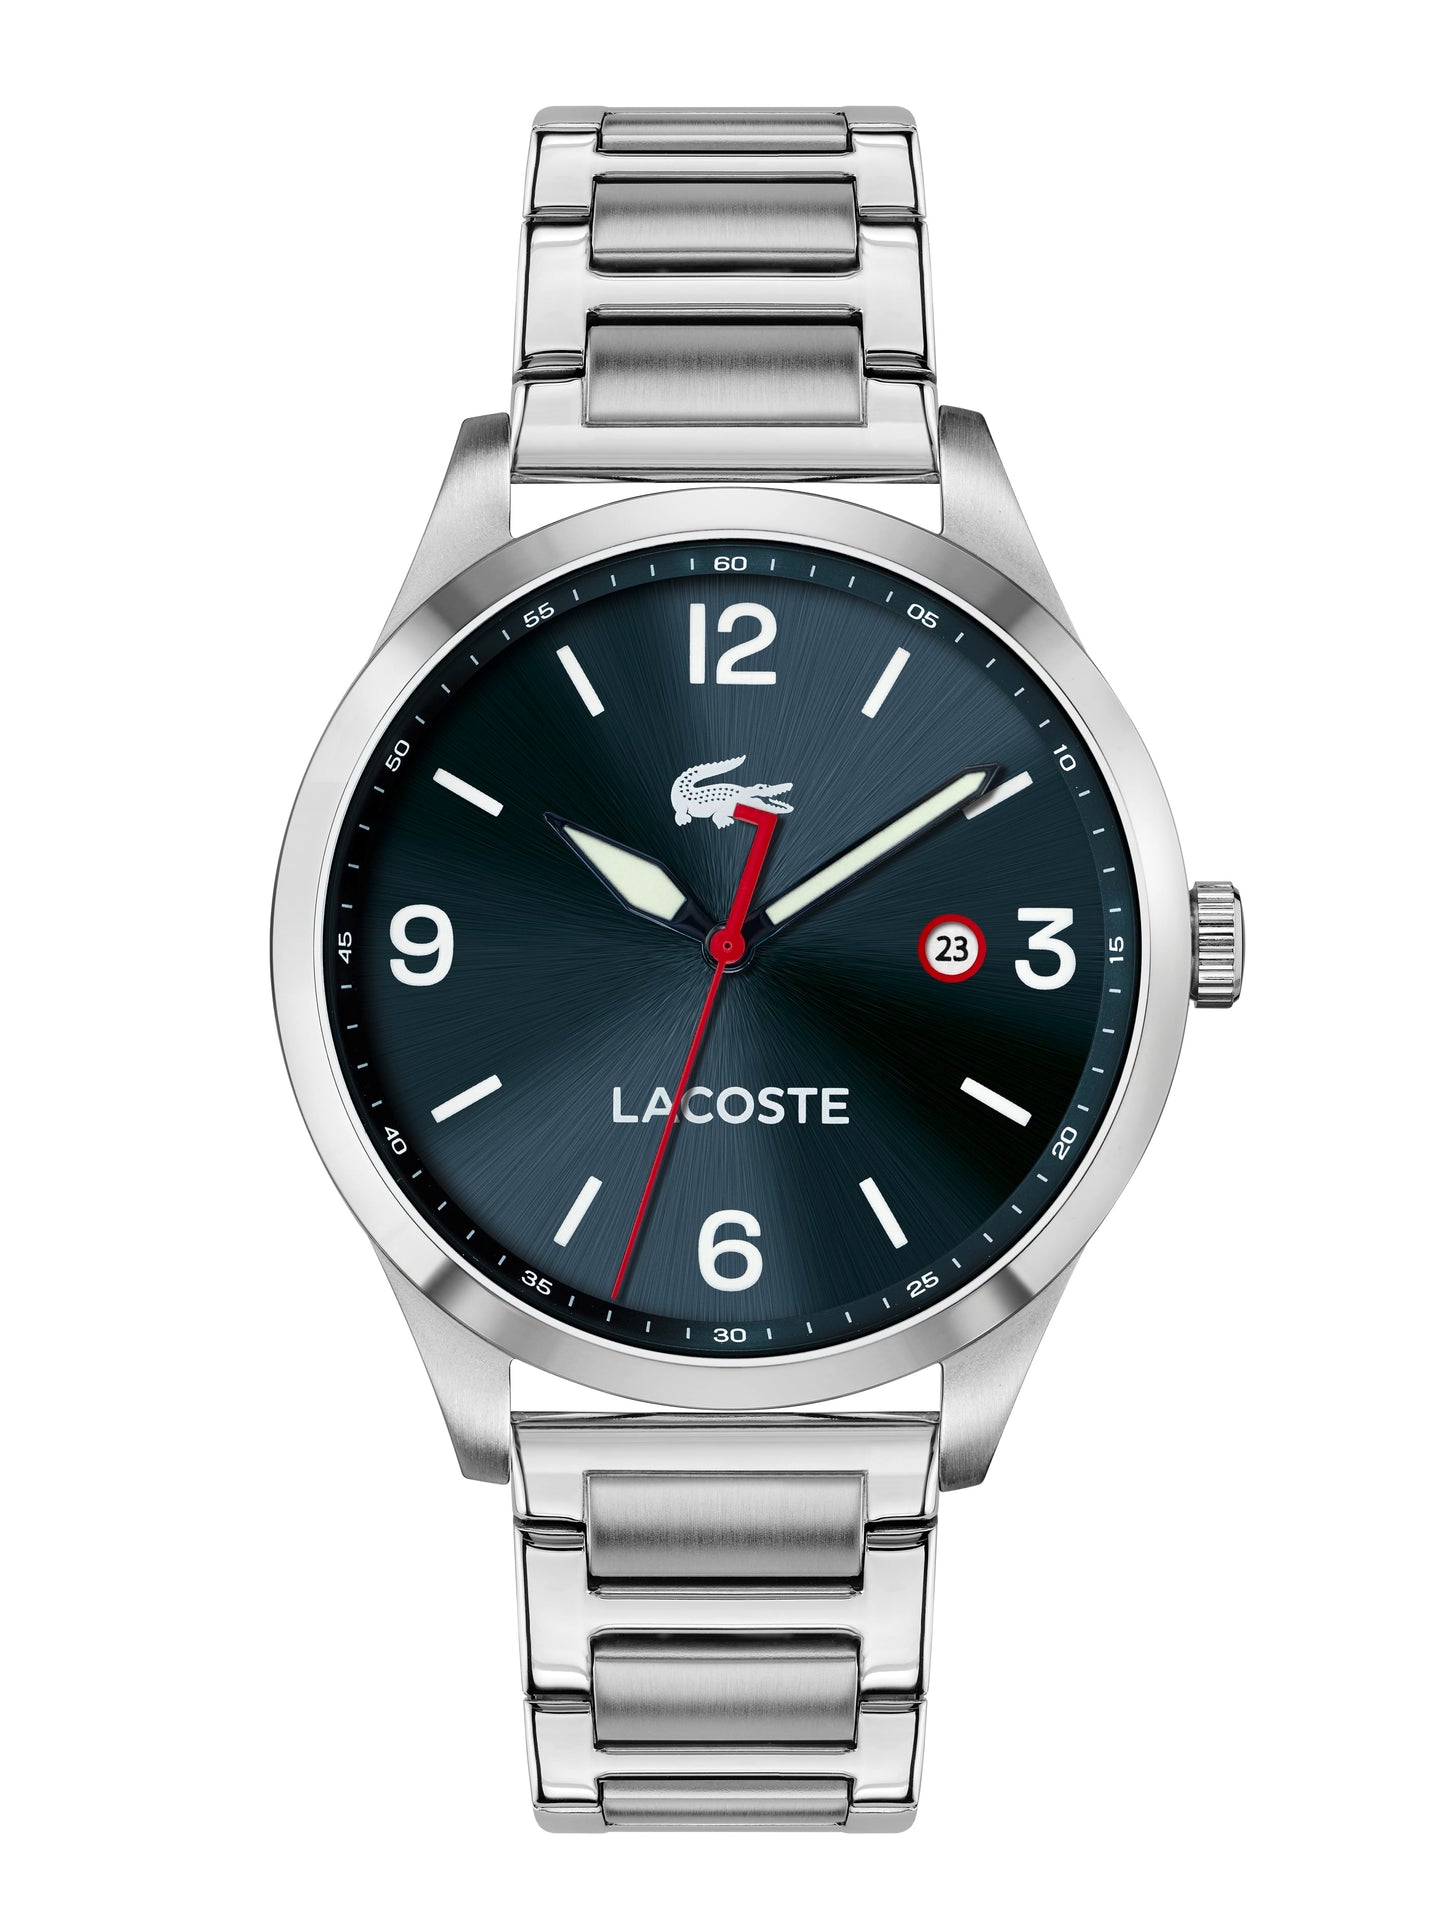 The Men's Traveler Silver - Blue Watch 2011108, a vintage-inspired timepiece by Lacoste, is shown on a white background.